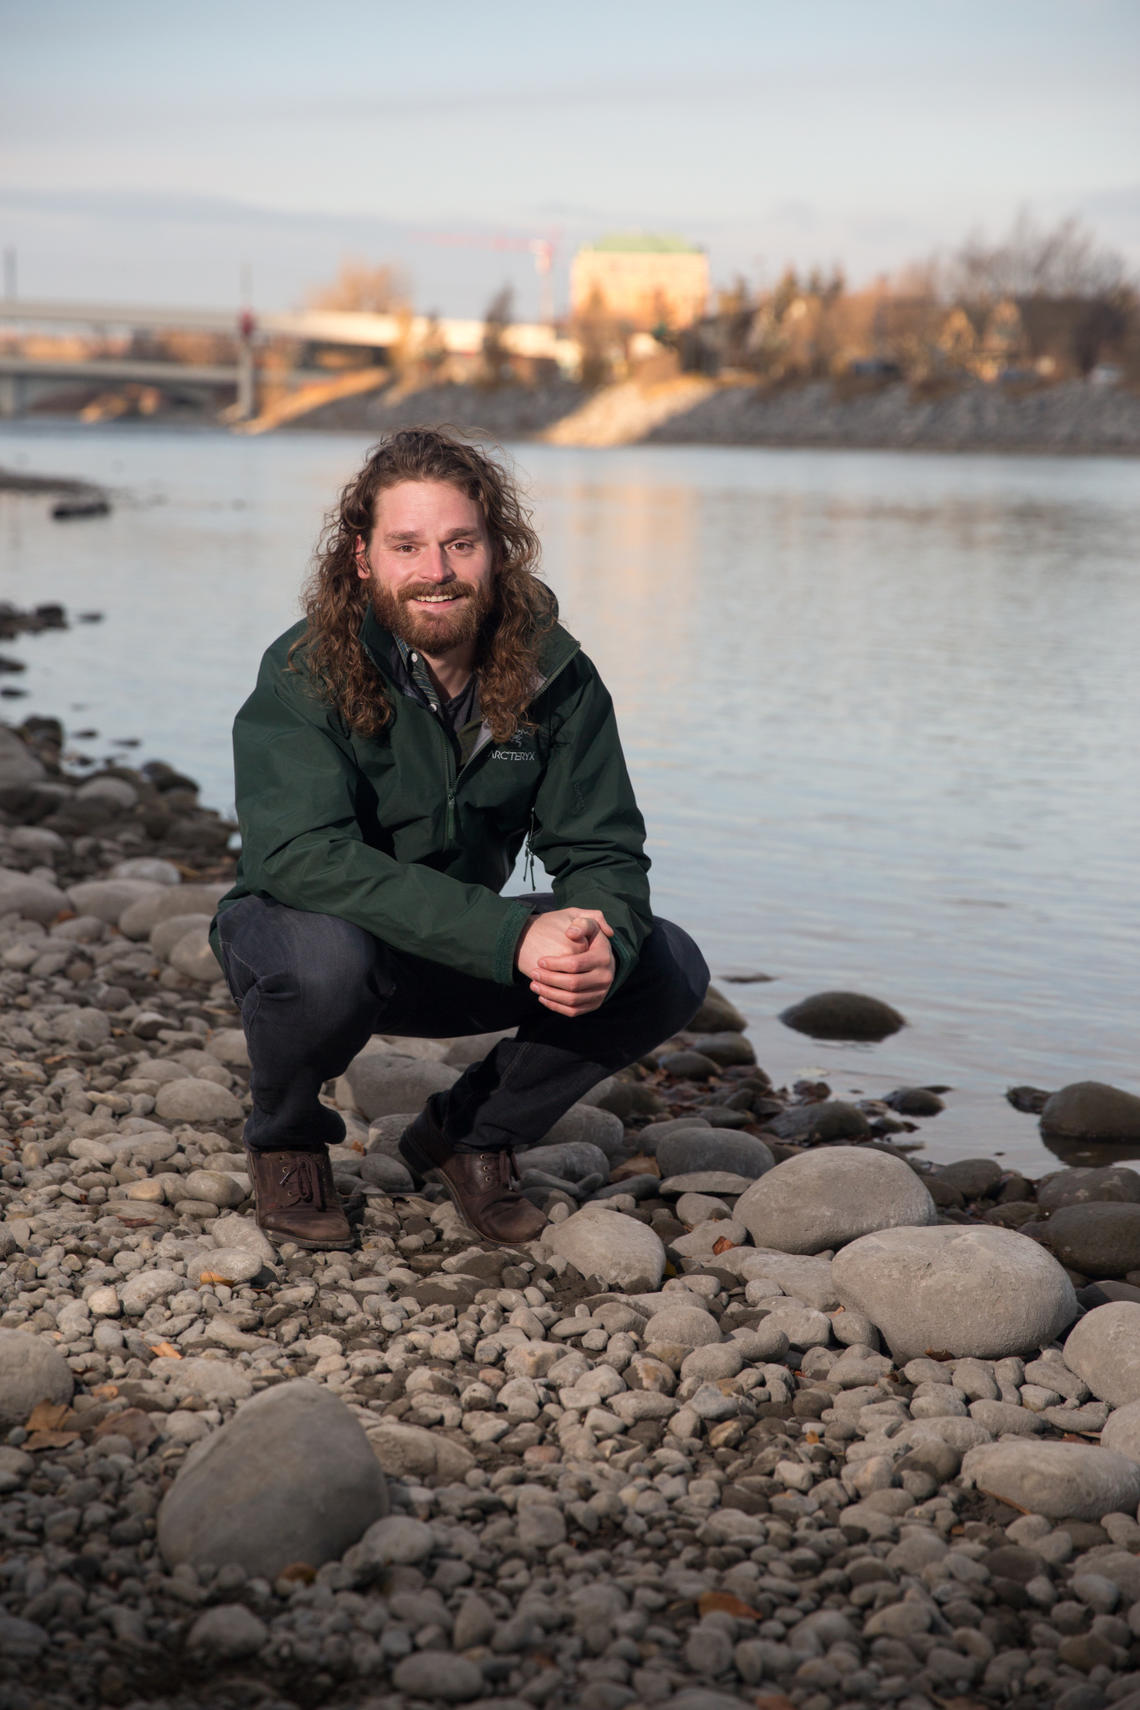 Chris Cahill, PhD student and lead author of the study, says resource management is all about tradeoffs. His PhD focuses on using such an “adaptive management” approach in high-angling effort inland fisheries.